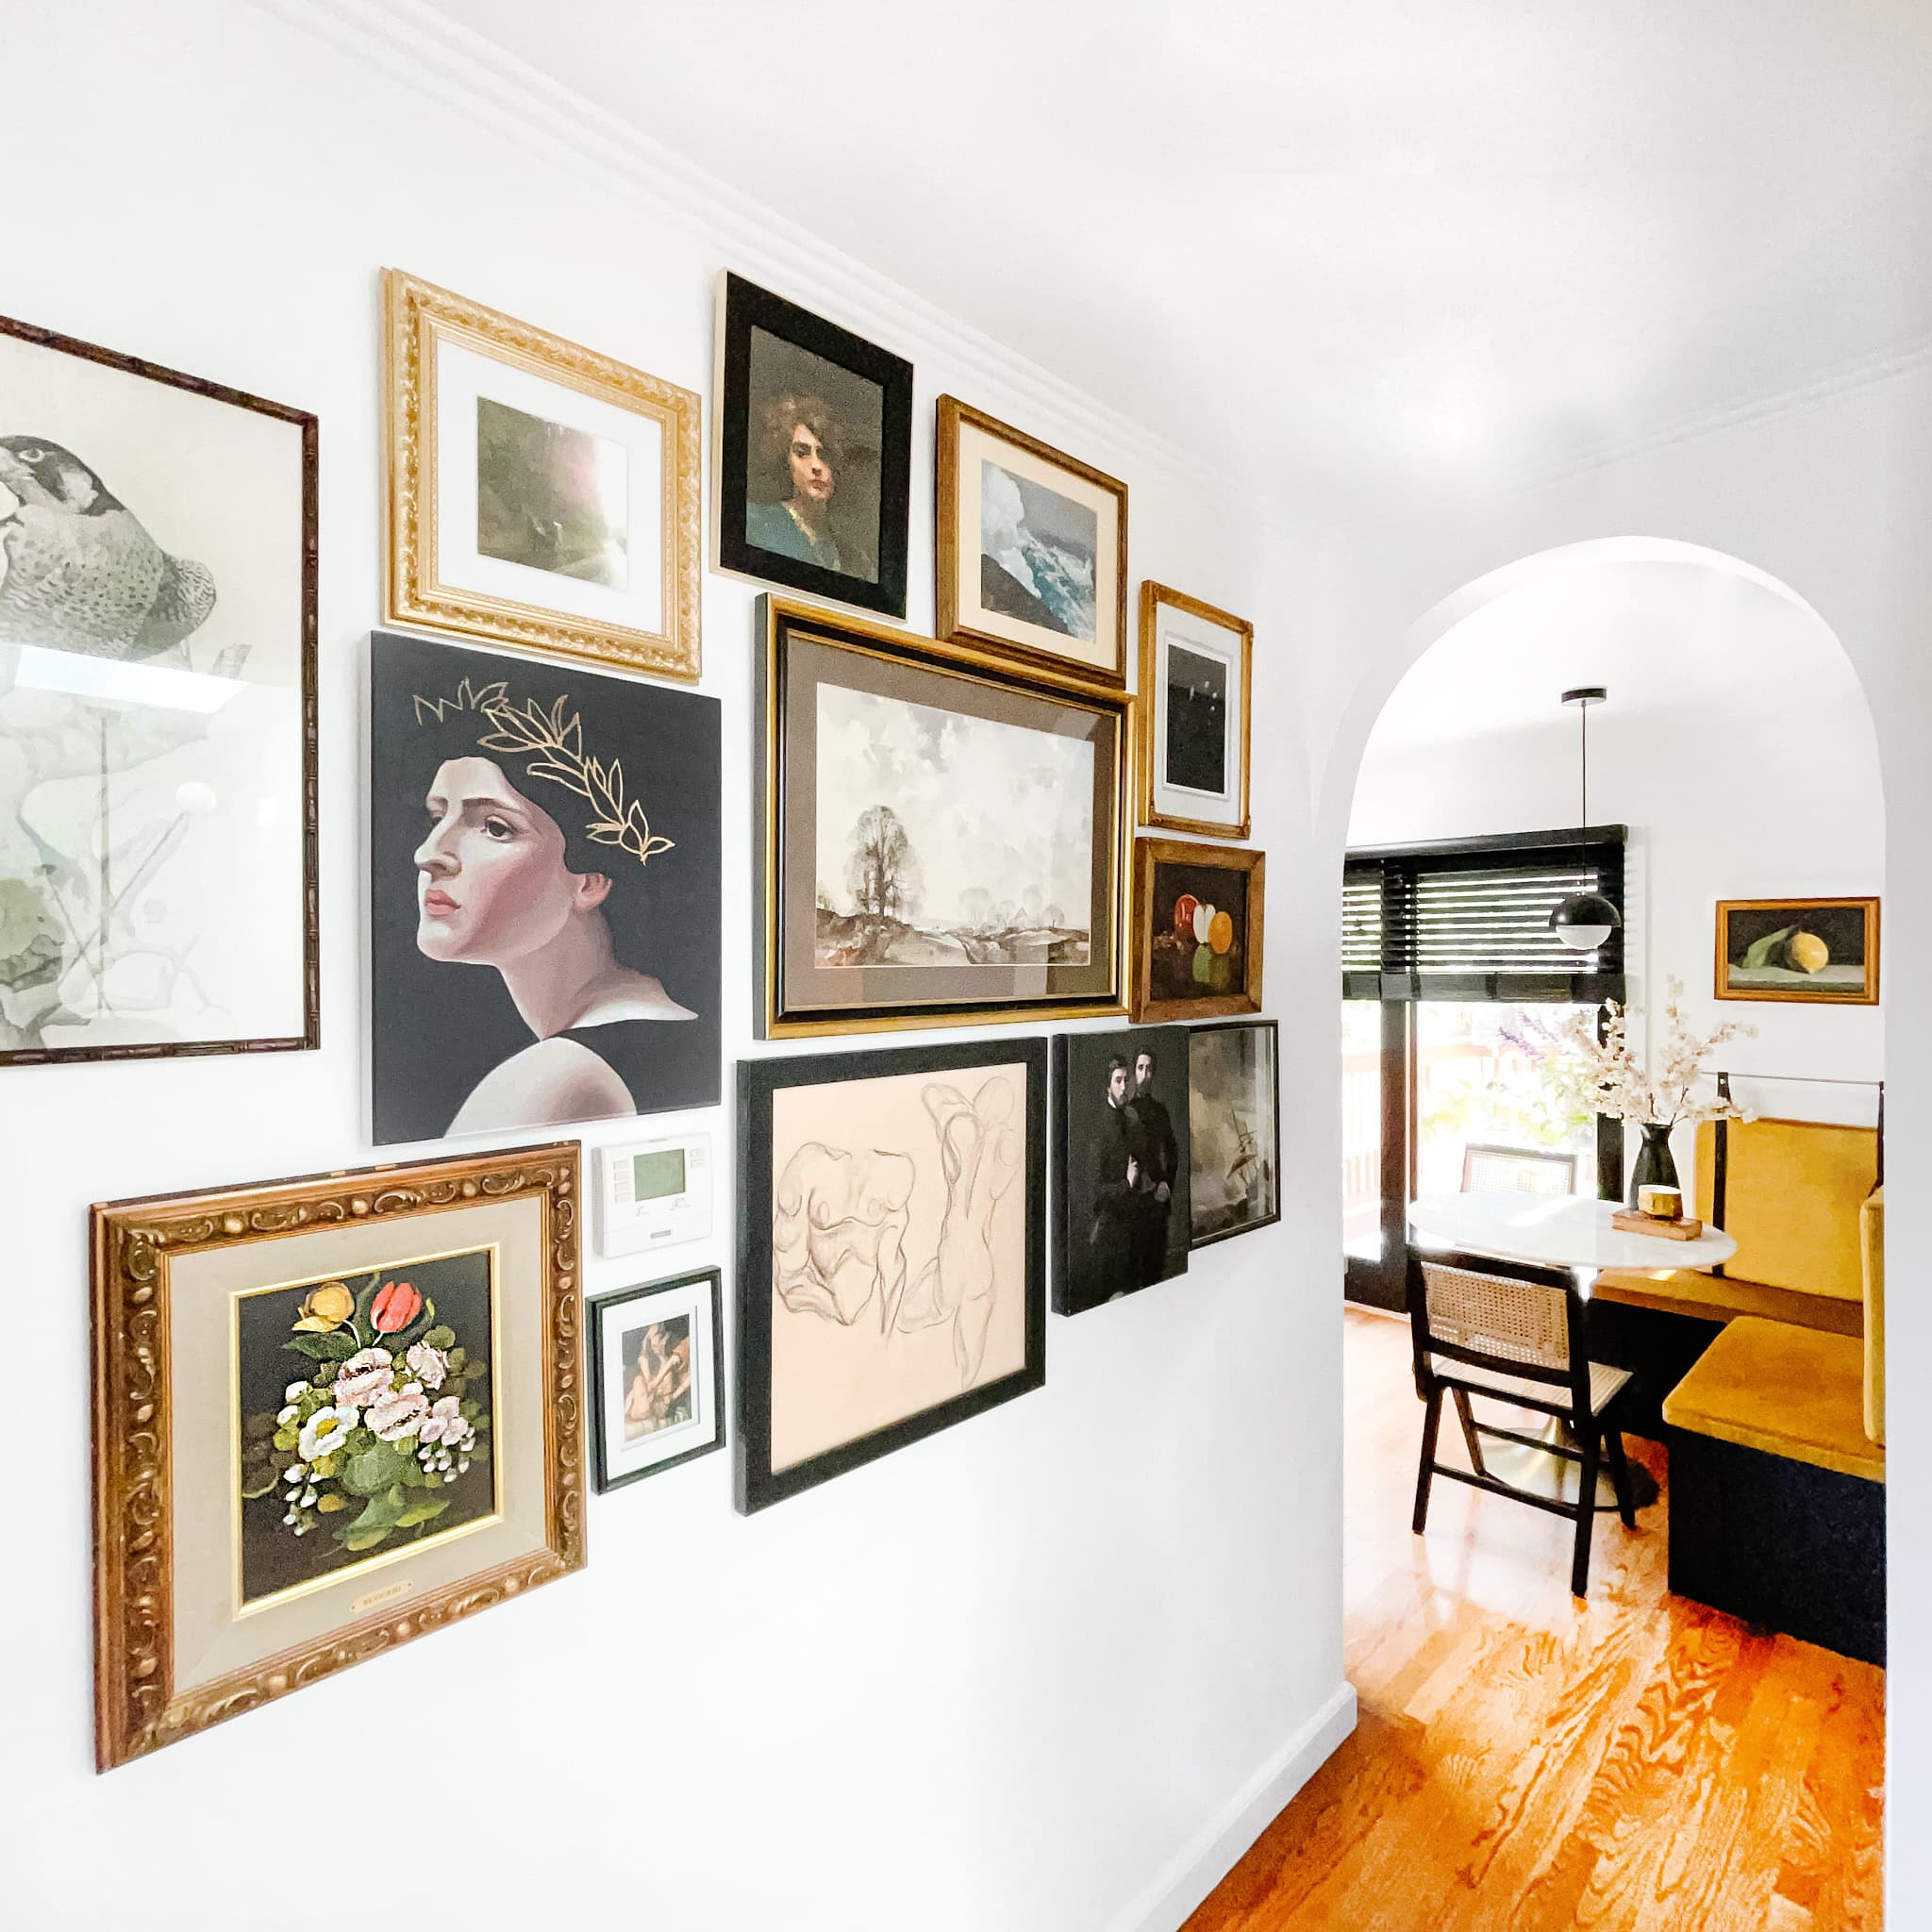 This Style of of Art Will Make Your Home Feel Timeless